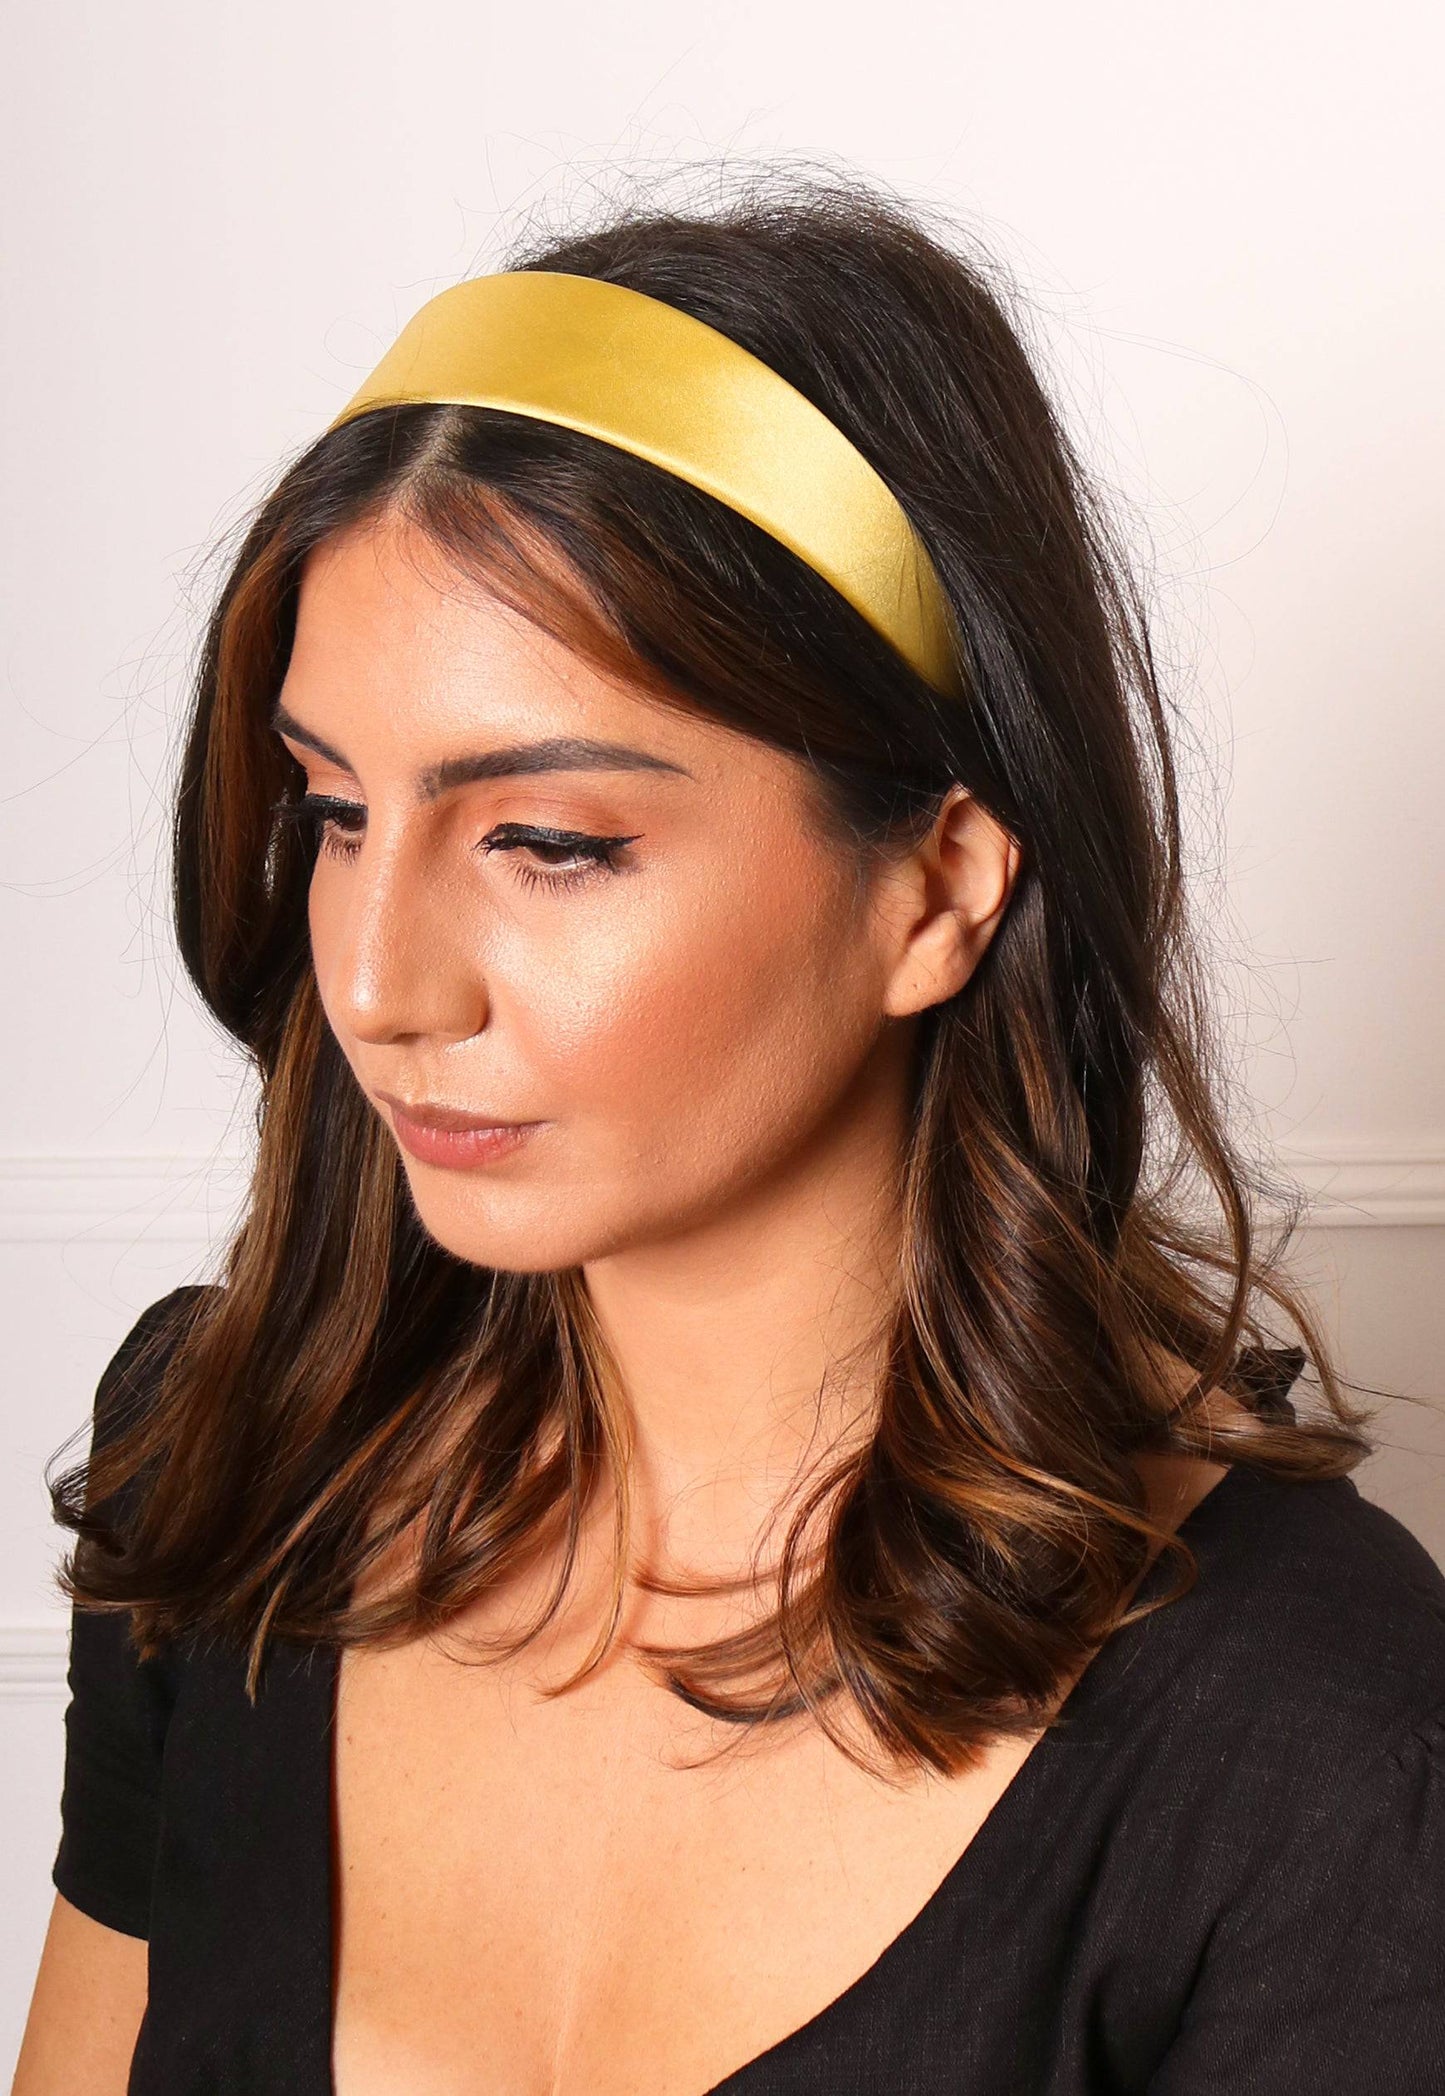 Wide Satin Alice Headband in Mustard Yellow - One Nation Clothing